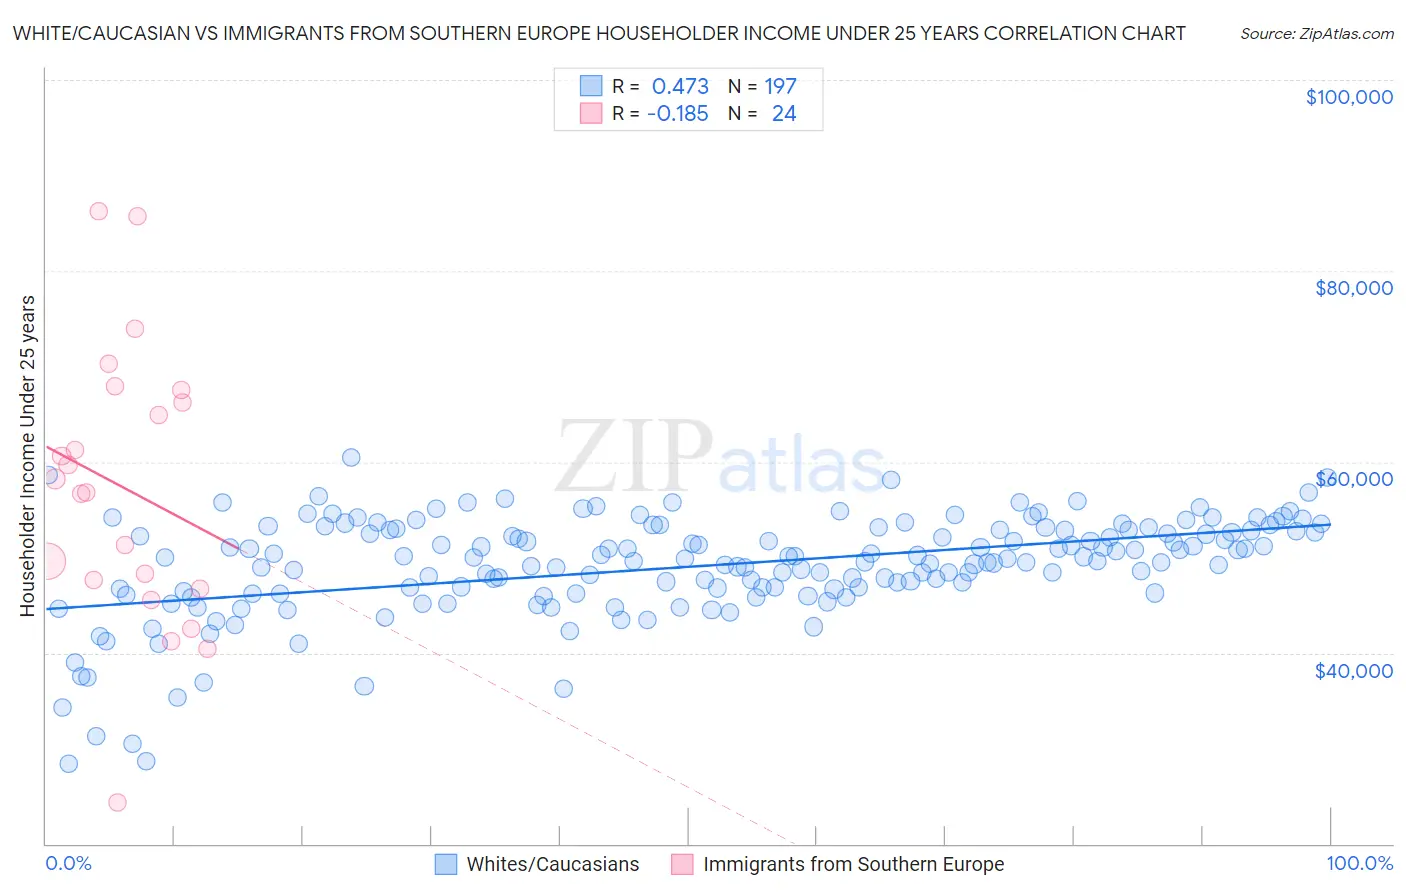 White/Caucasian vs Immigrants from Southern Europe Householder Income Under 25 years